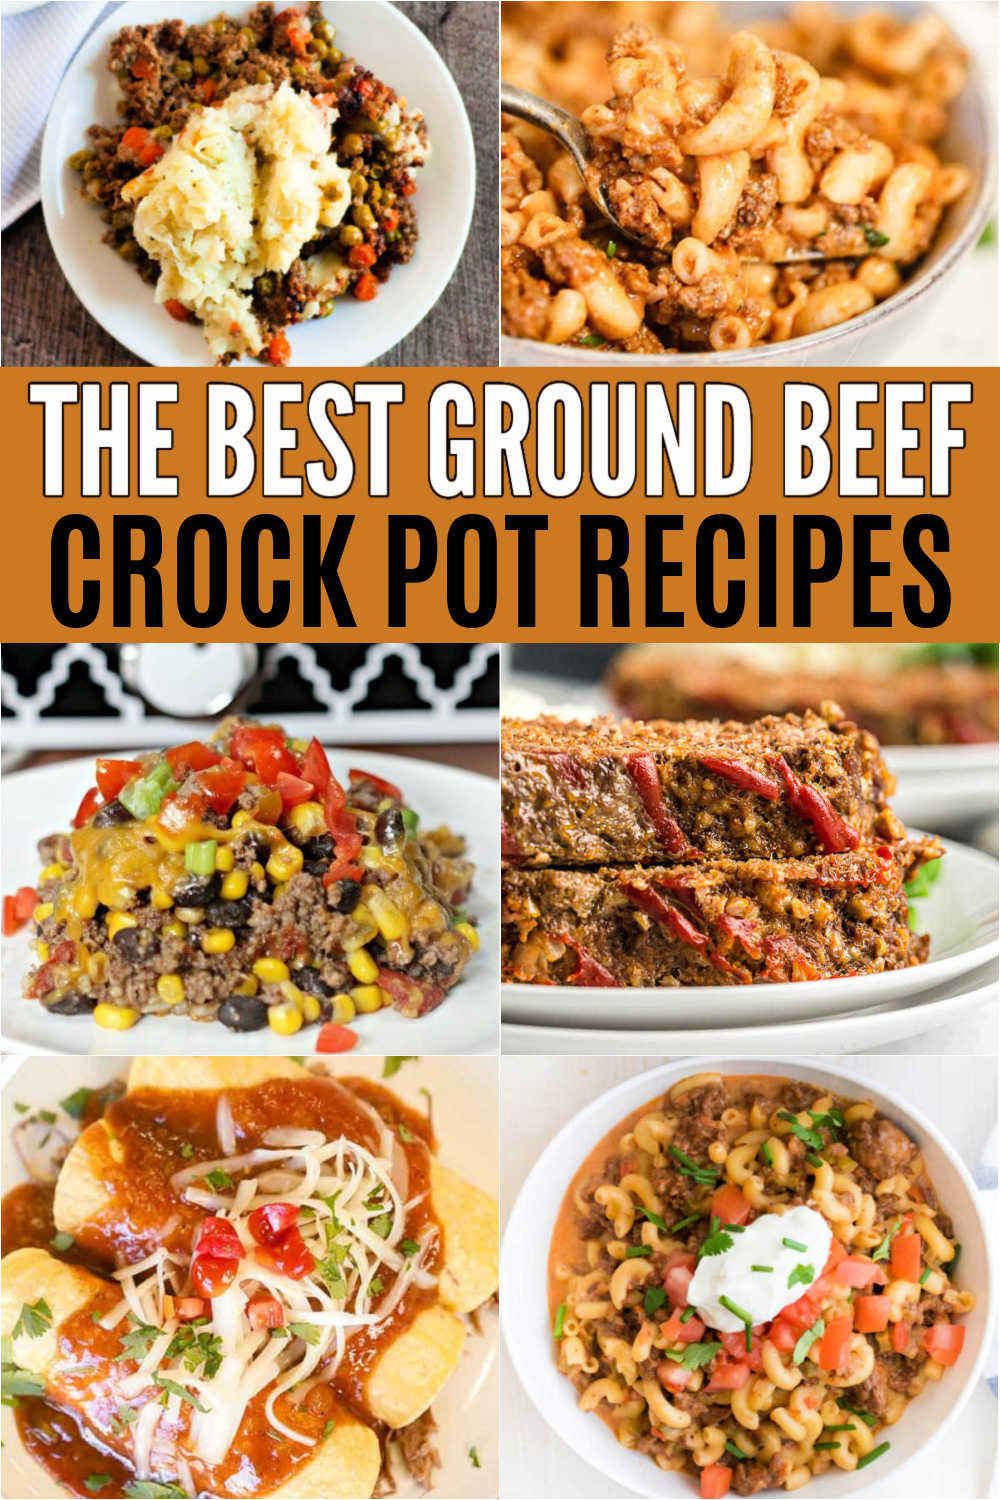 Ground beef crock pot recipes - Over 25 easy ideas